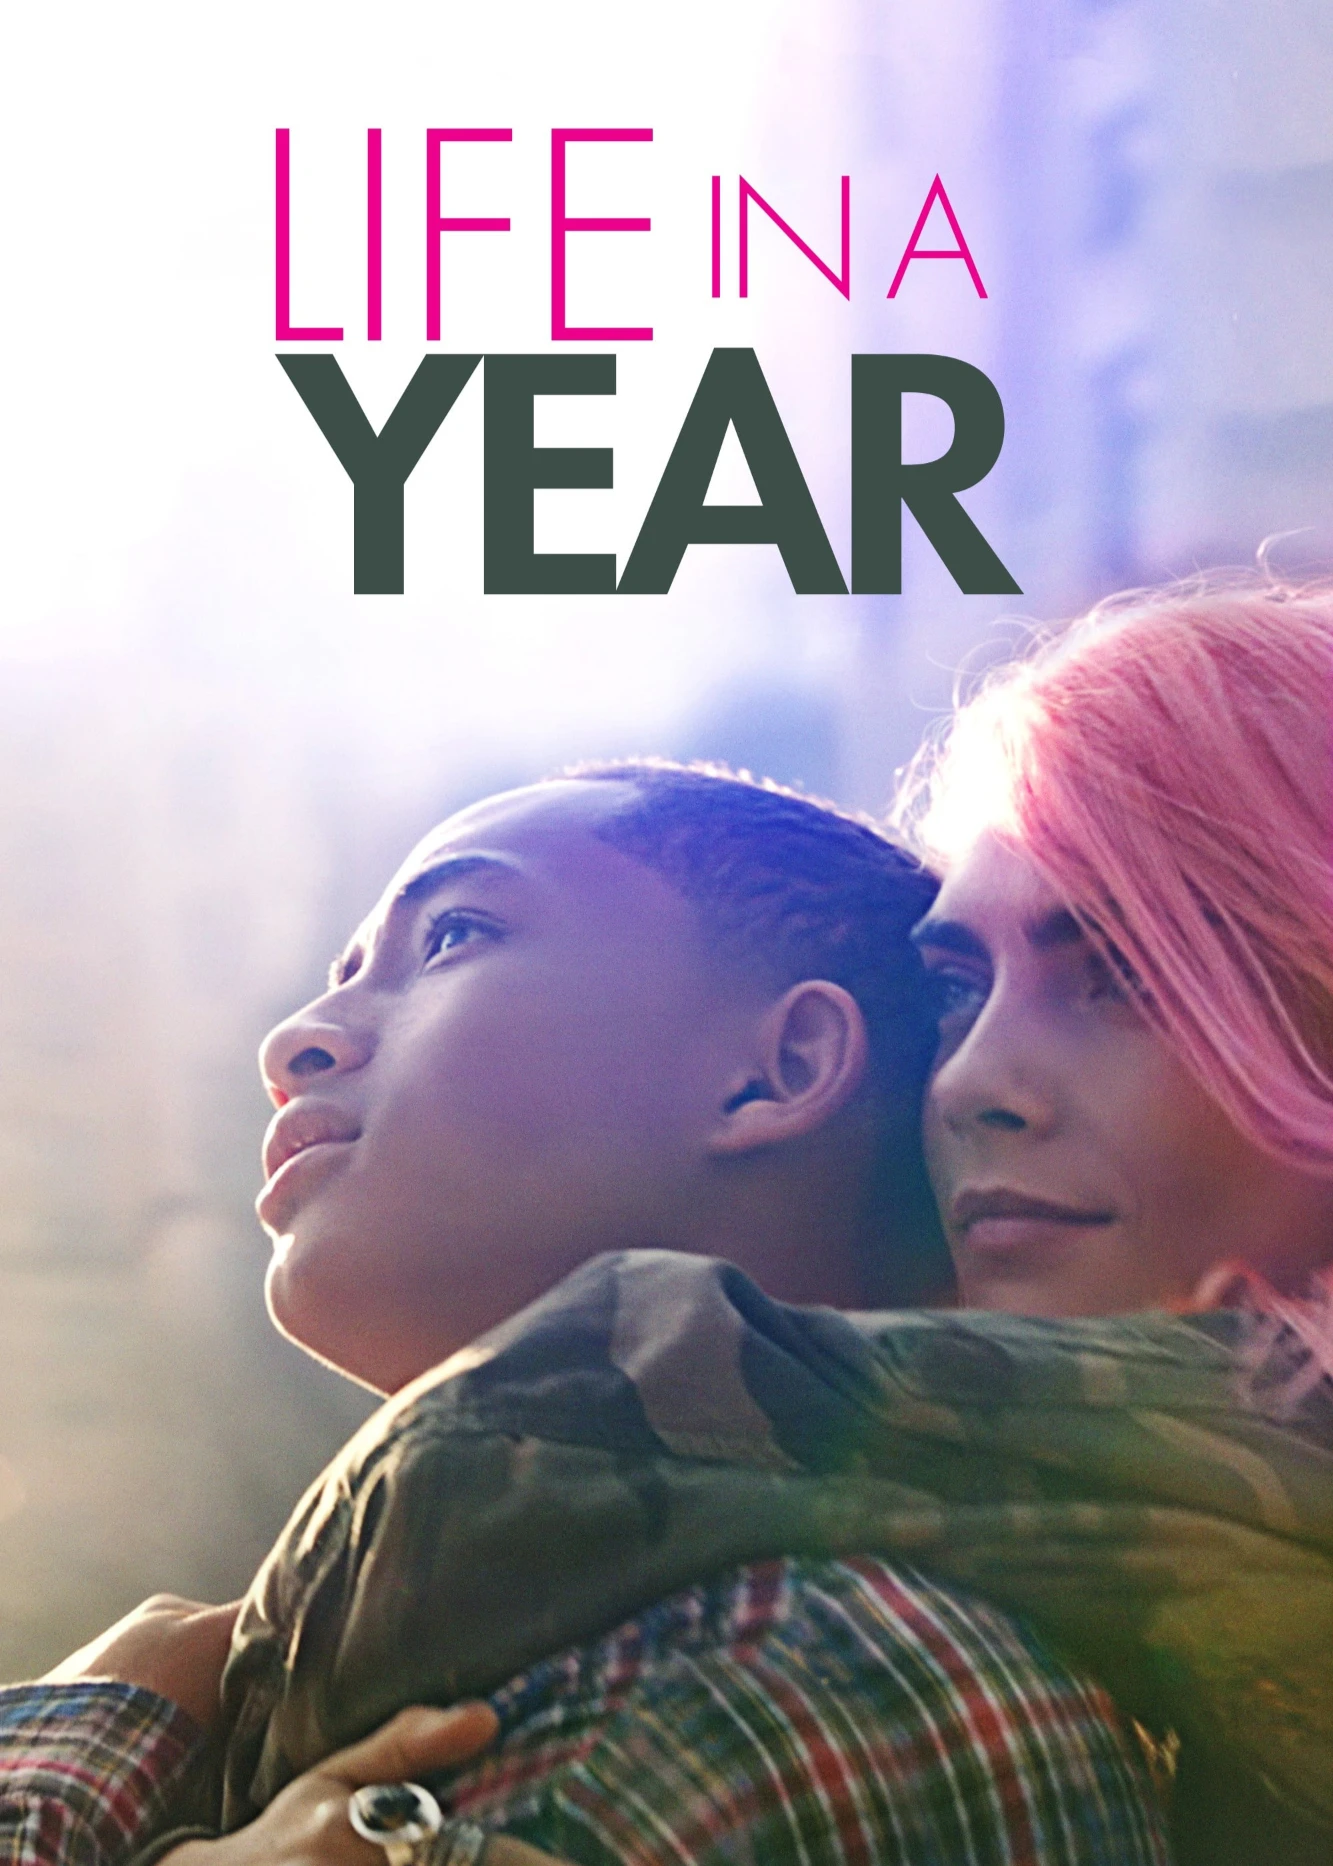 Life in a Year | Life in a Year (2020)